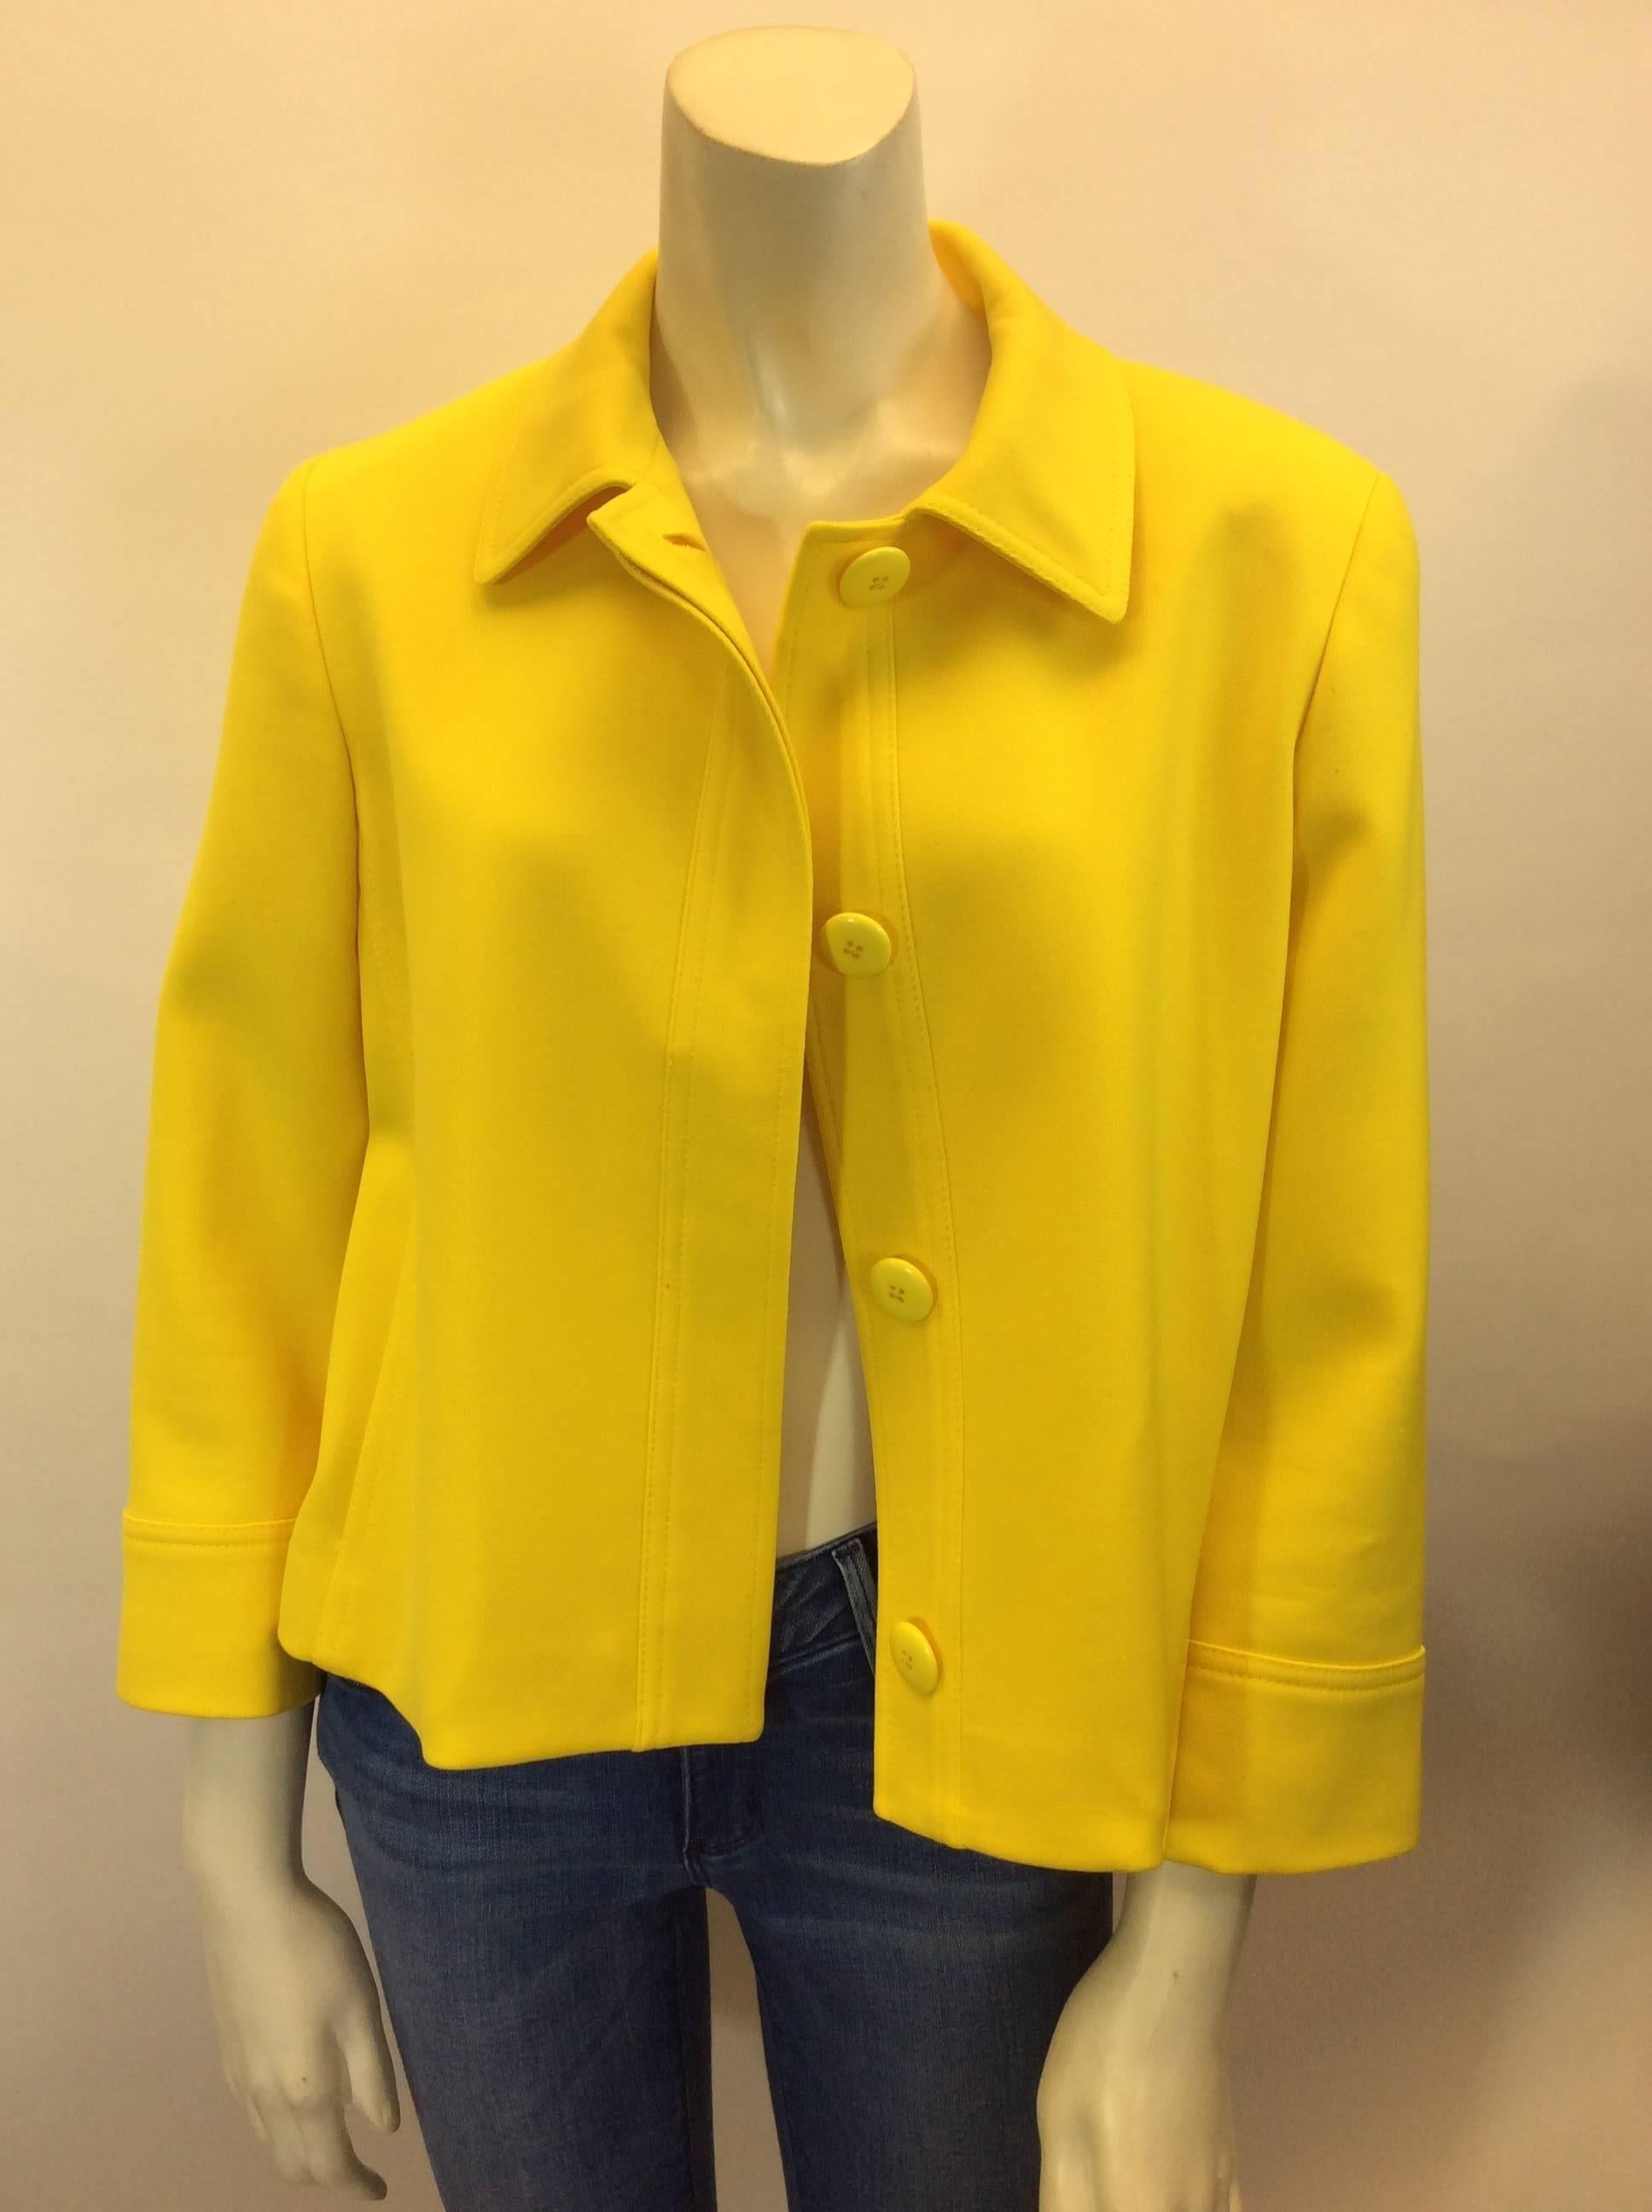 Ralph Lauren Cropped Bright Yellow Jacket
Black label
Cropped cloak style
Standard collar
Oversized yellow buttons
$185
Size 10
Fully lined interior, two slit style pockets on the exterior
96% Virgin Wool, 4% Elastine
